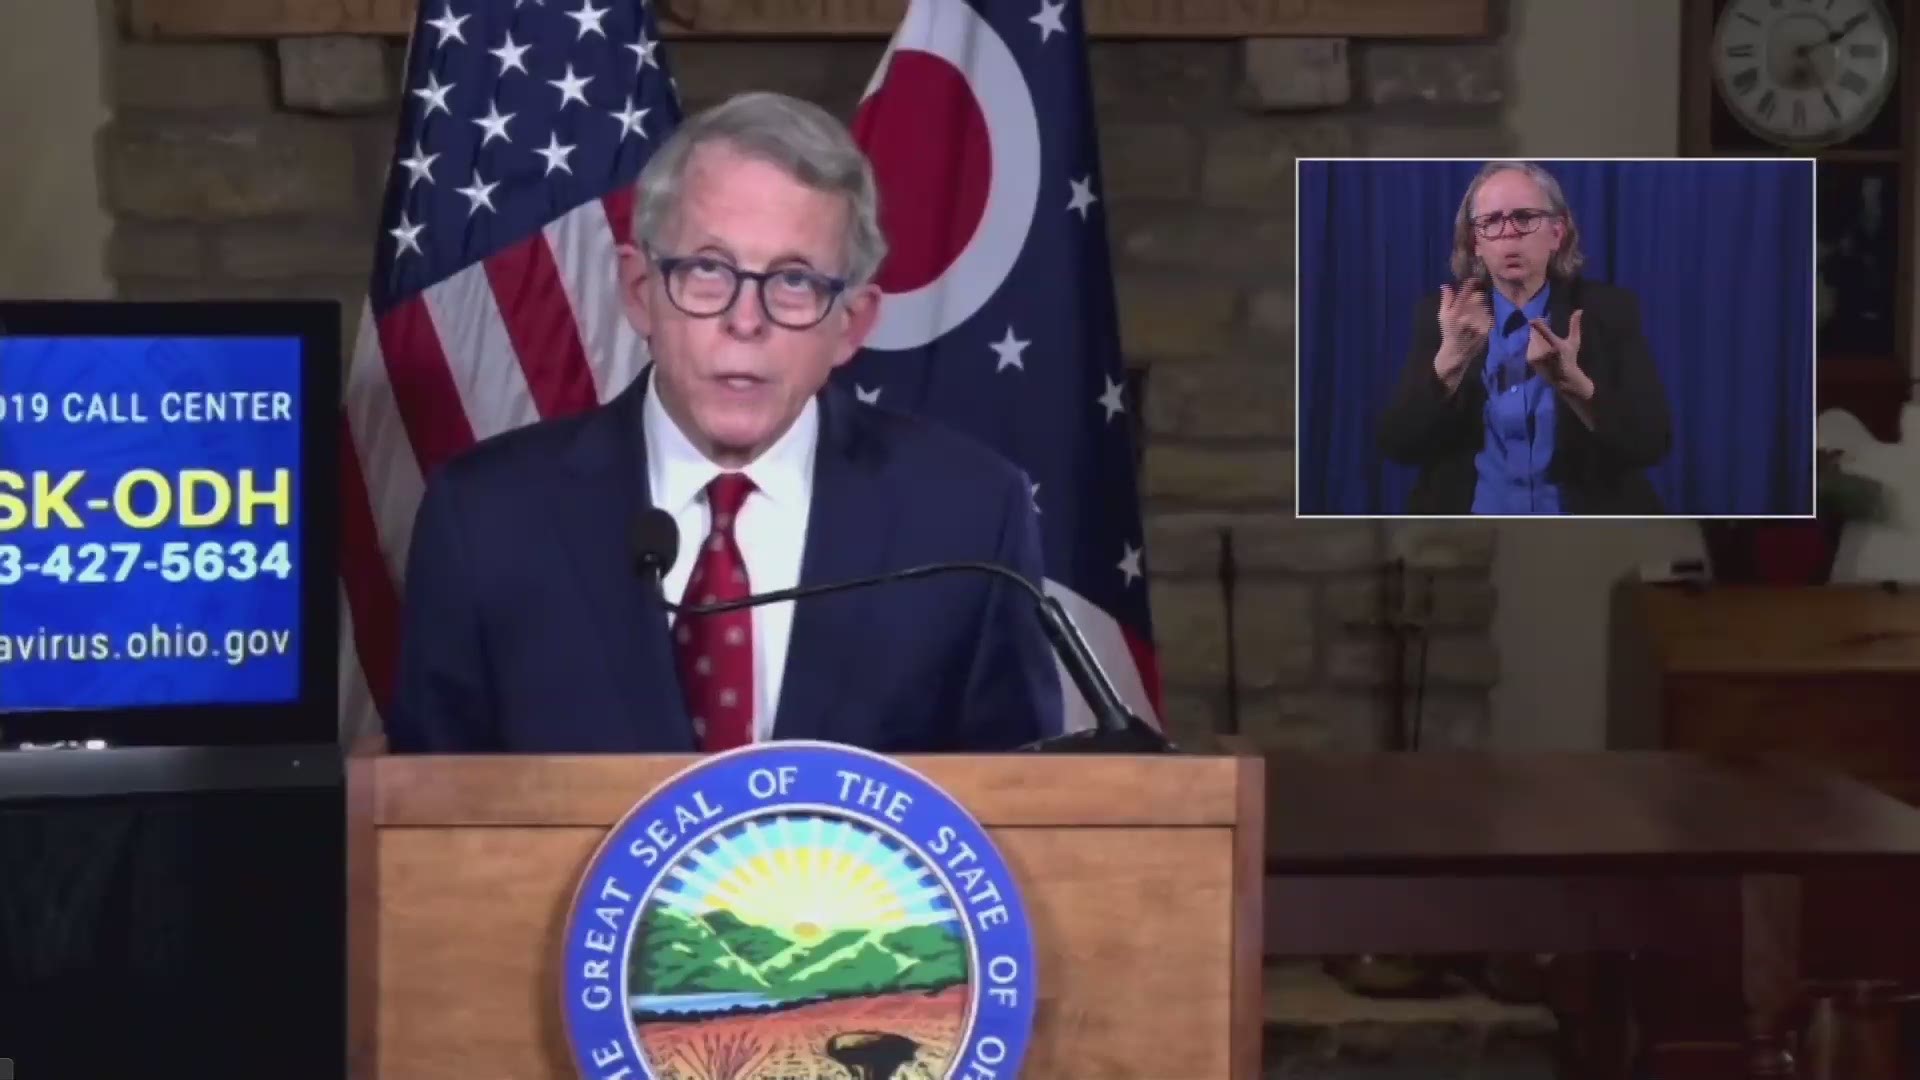 Mike DeWine said on Thursday that, beginning on January 19, the coronavirus vaccine will be available to individuals 80-years of age and older.